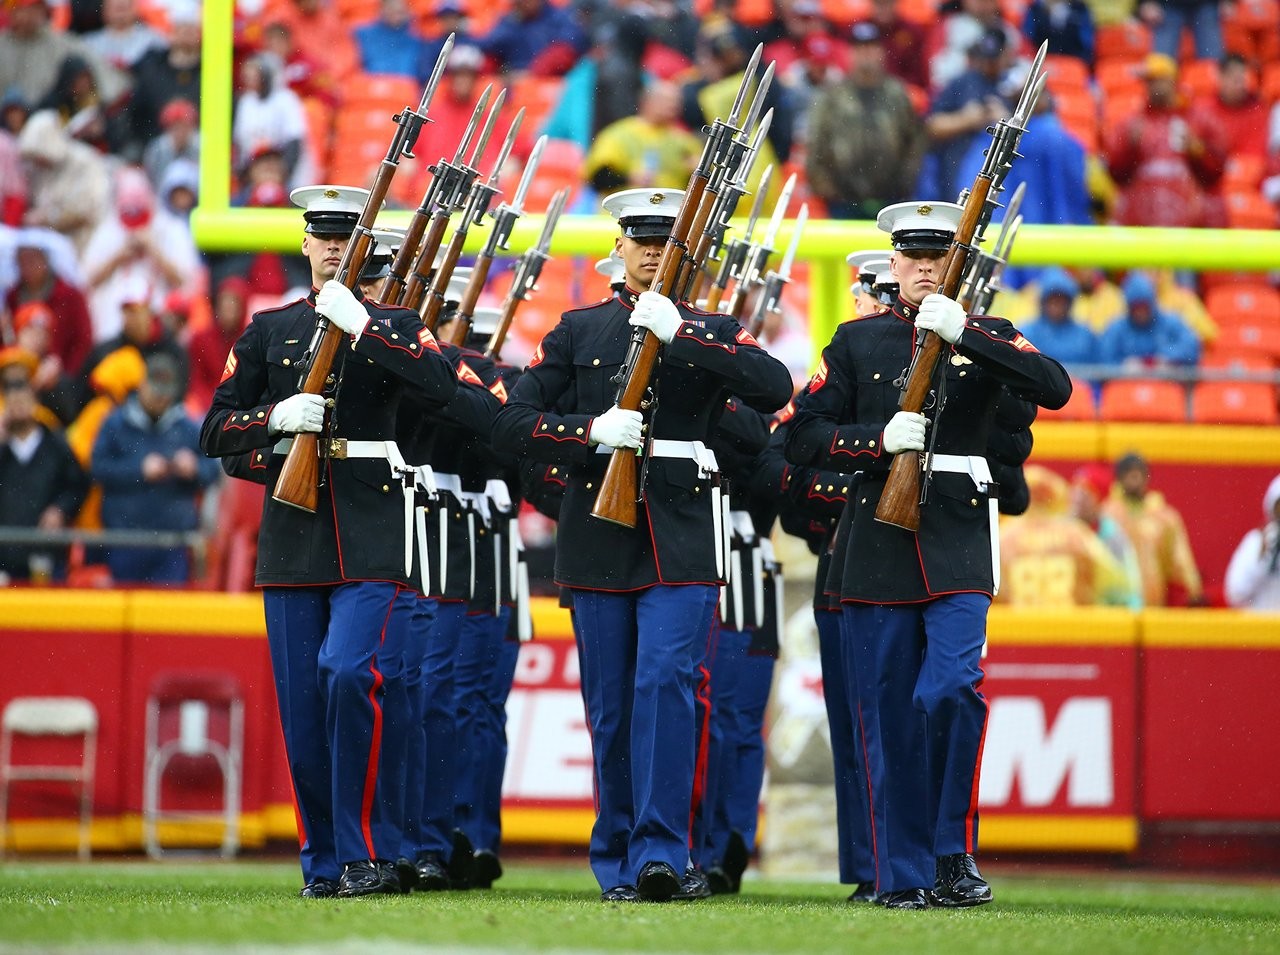 Chiefs Hold Salute to Service Game, Surprise Soldier with Thank You of